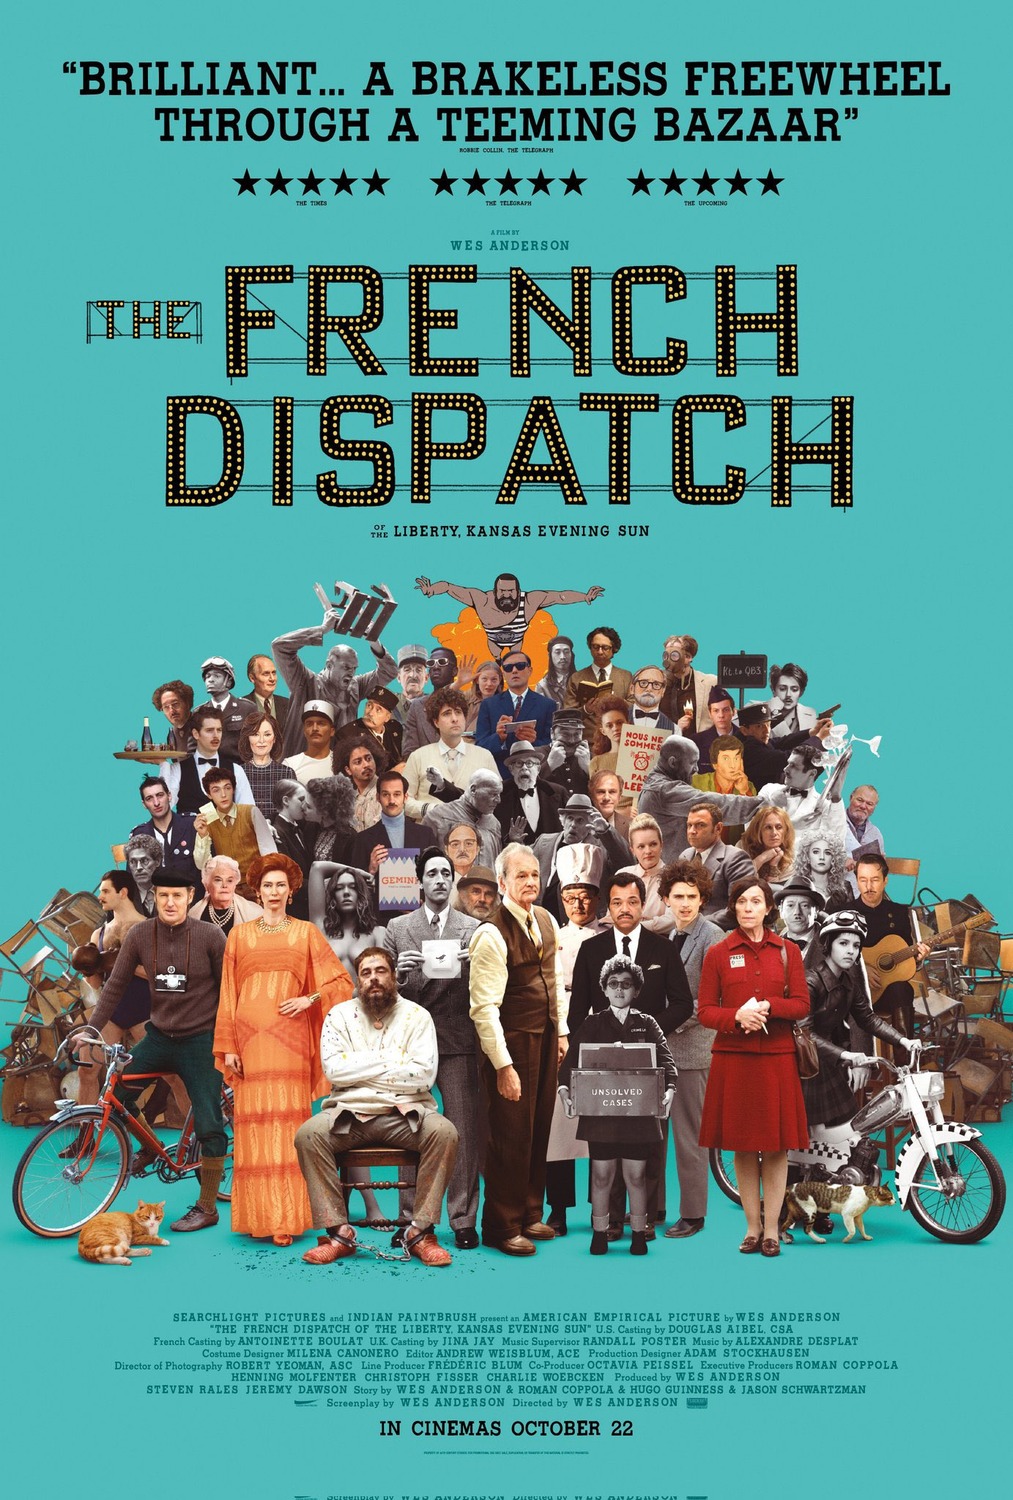 The French Dispatch – 2 Sentence Movie Review. Tons of celebrities in a Wes Anderson movie. It’s a Wes Anderson movie… they’re all the same.